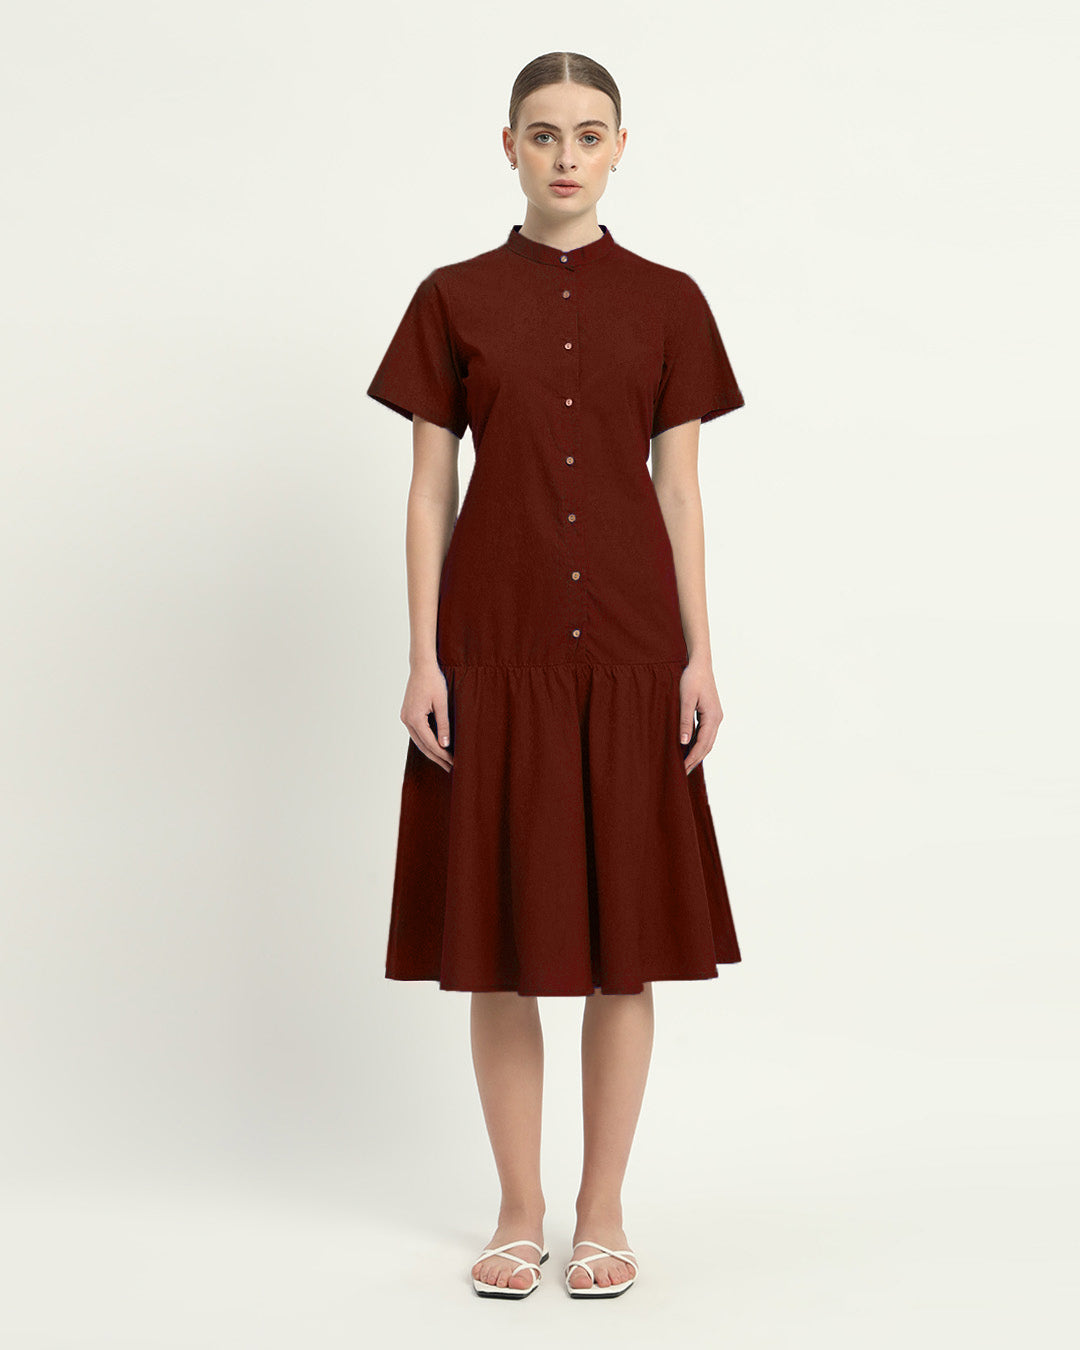 The Rouge Melrose Cotton Dress